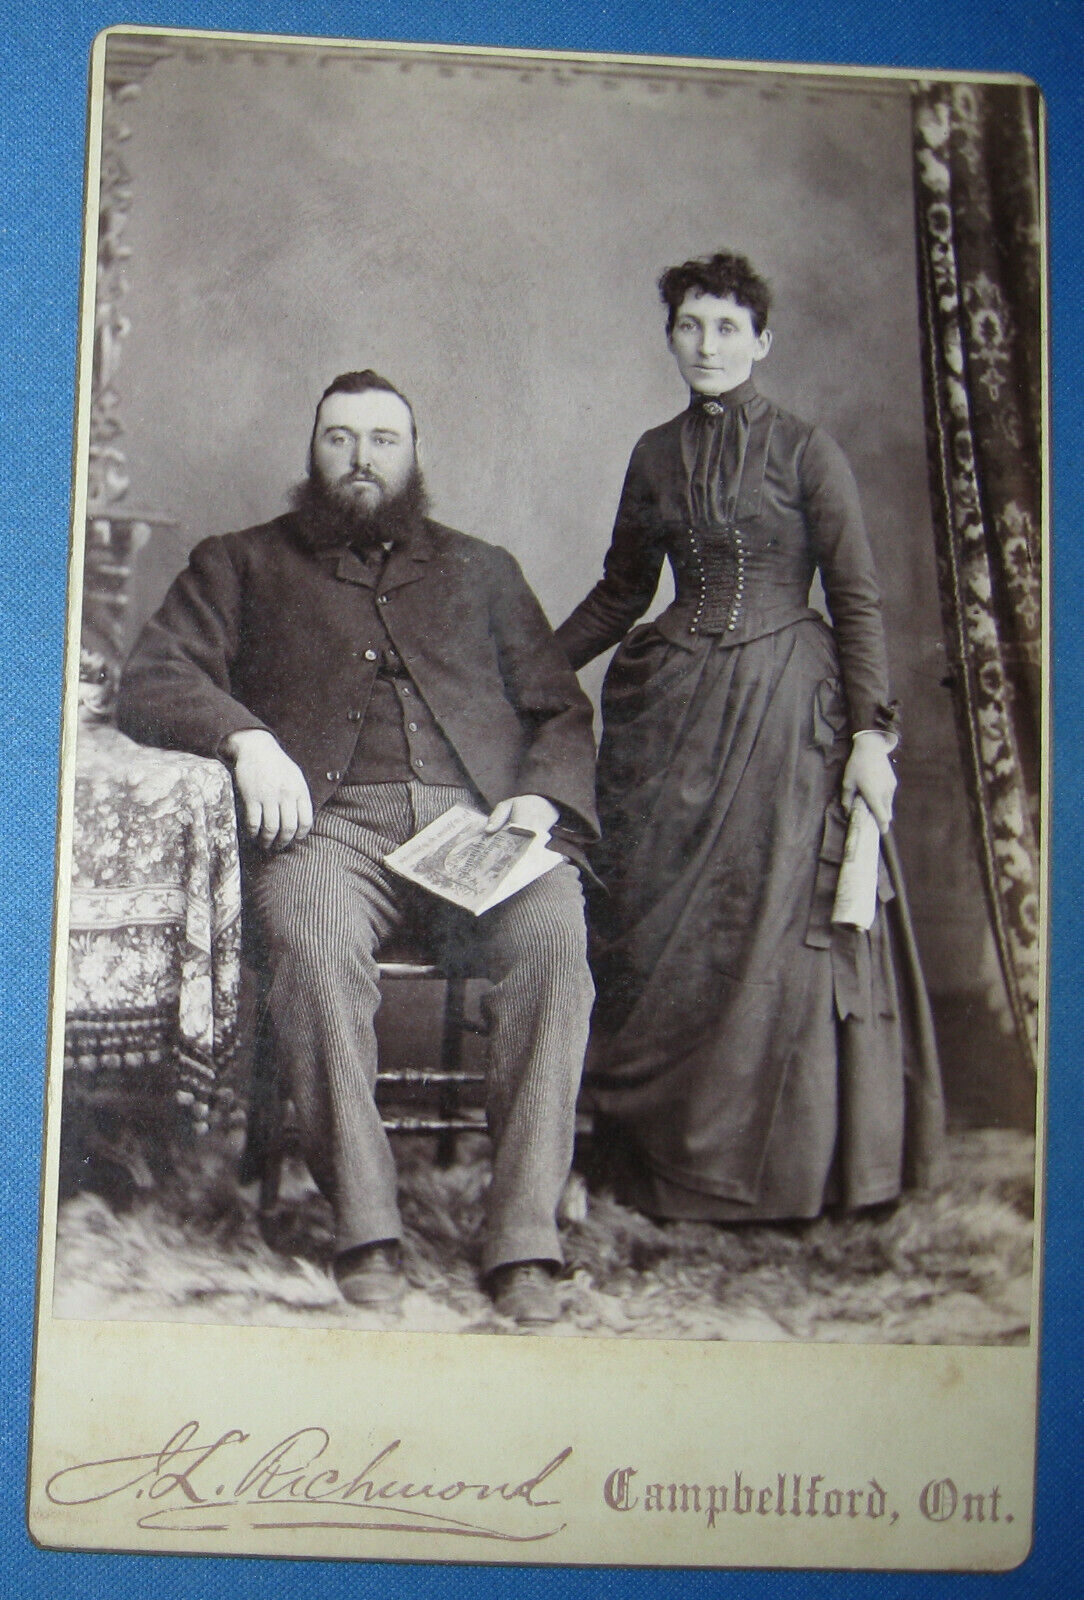 CABINET PHOTO OF MR. & MRS. MARTIN BY RICHMOND FROM CAMPBELLFORD ONTARIO CANADA